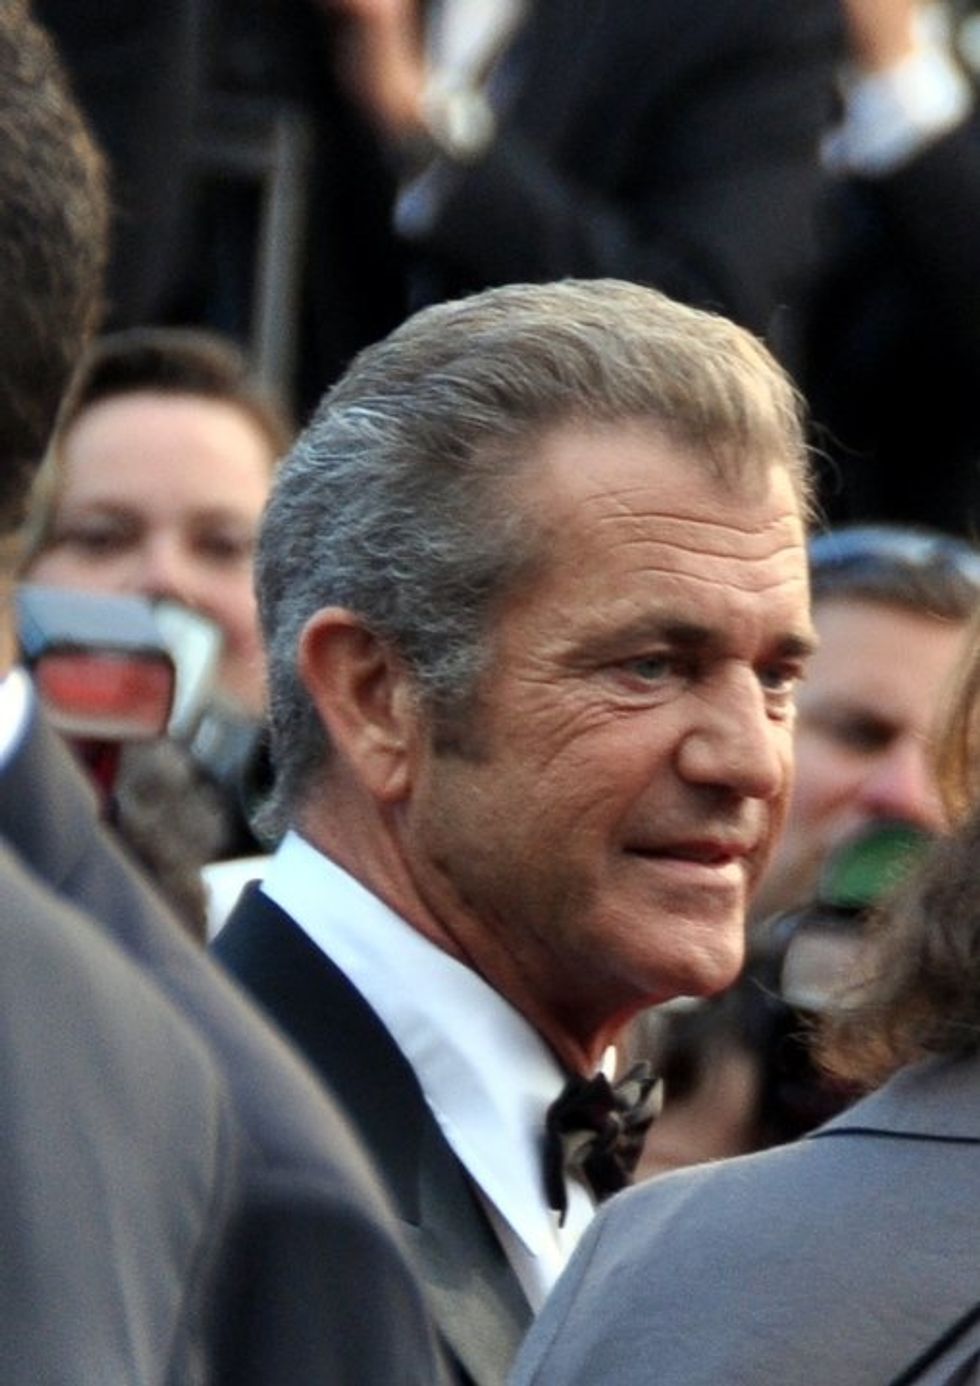 Deputy In Mel Gibson DUI Arrest Fights To Be Reinstated